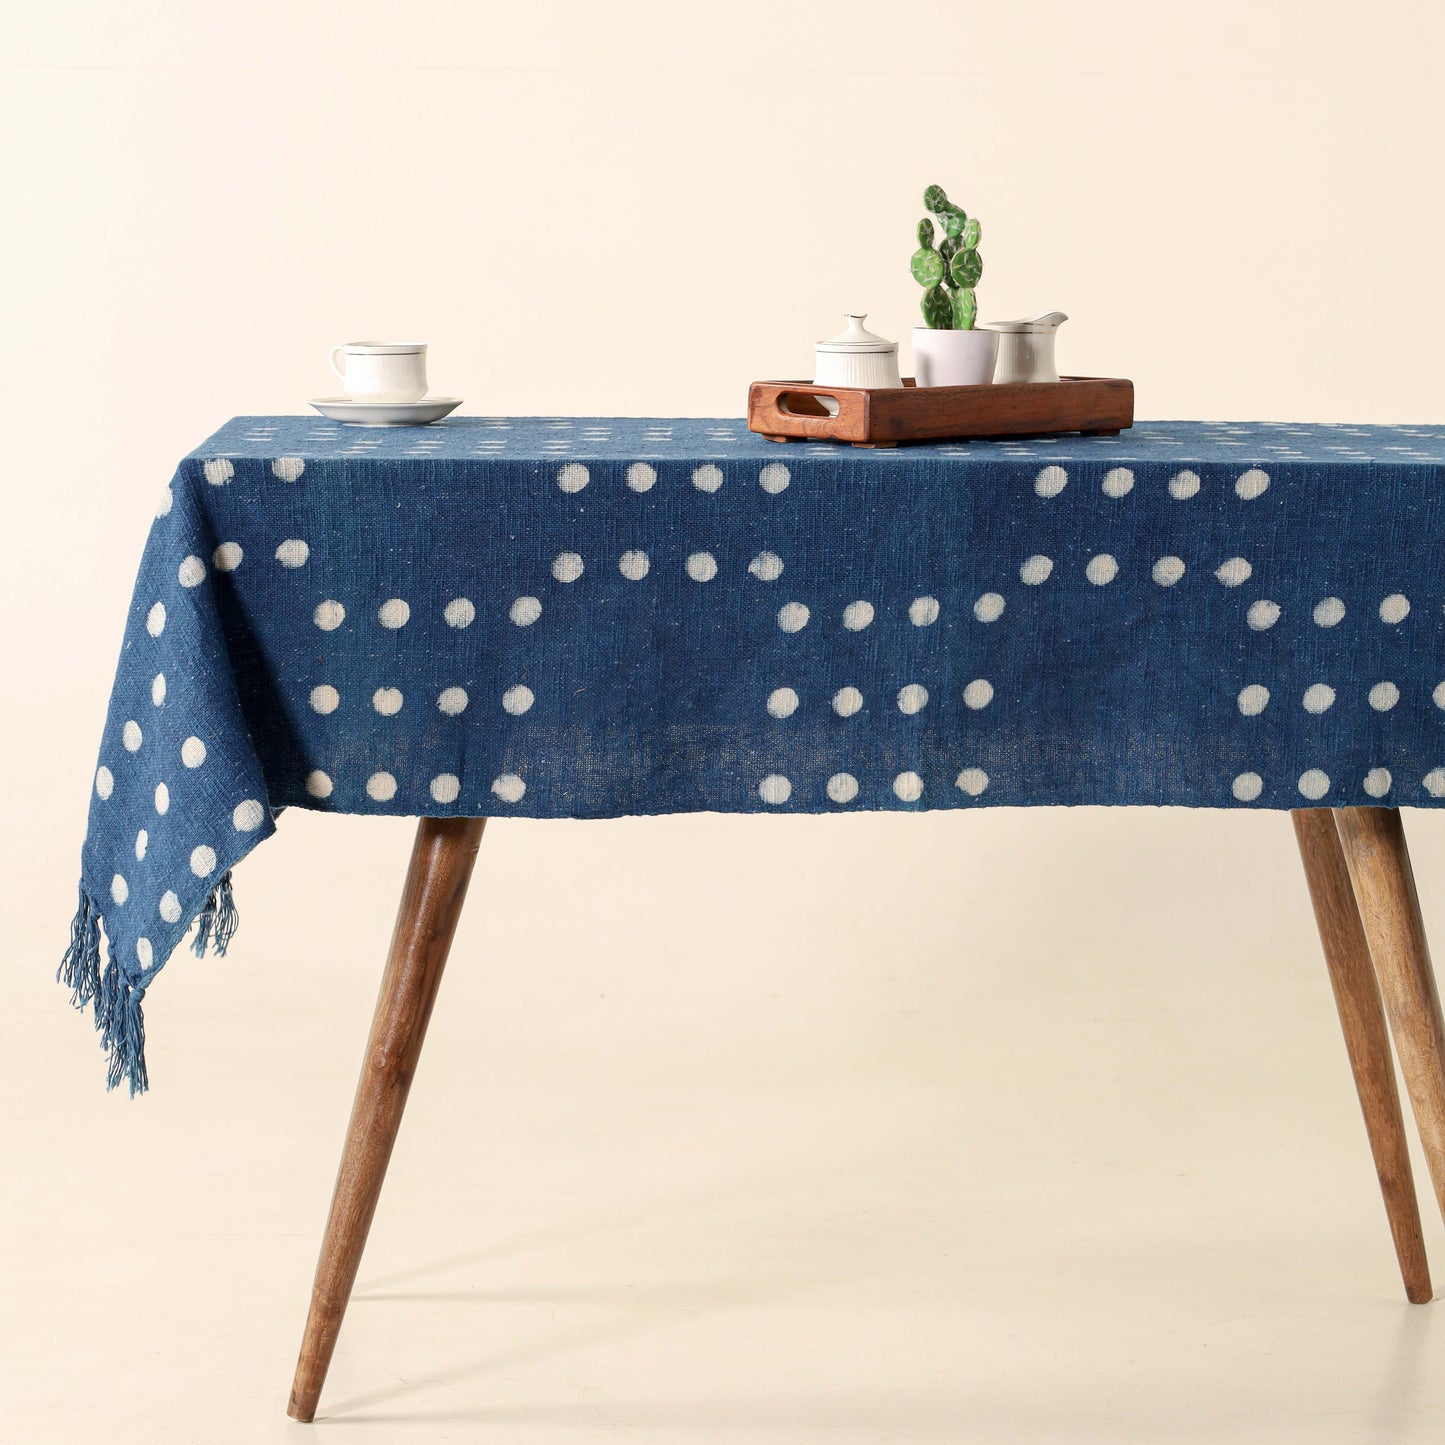 Blue White Dotted Cotton Tablecloth